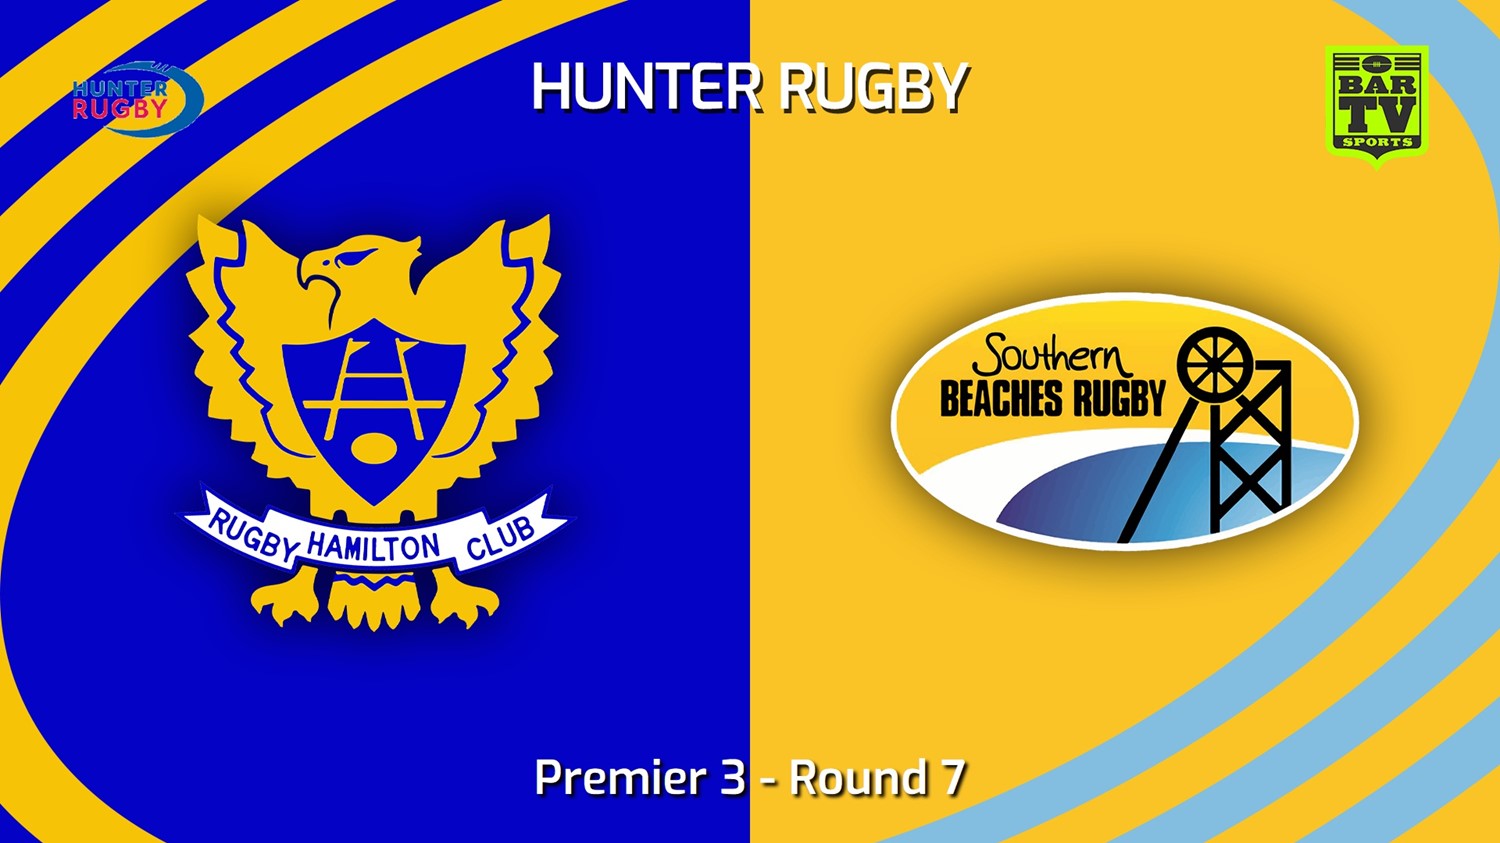 240525-video-Hunter Rugby Round 7 - Premier 3 - Hamilton Hawks v Southern Beaches Slate Image